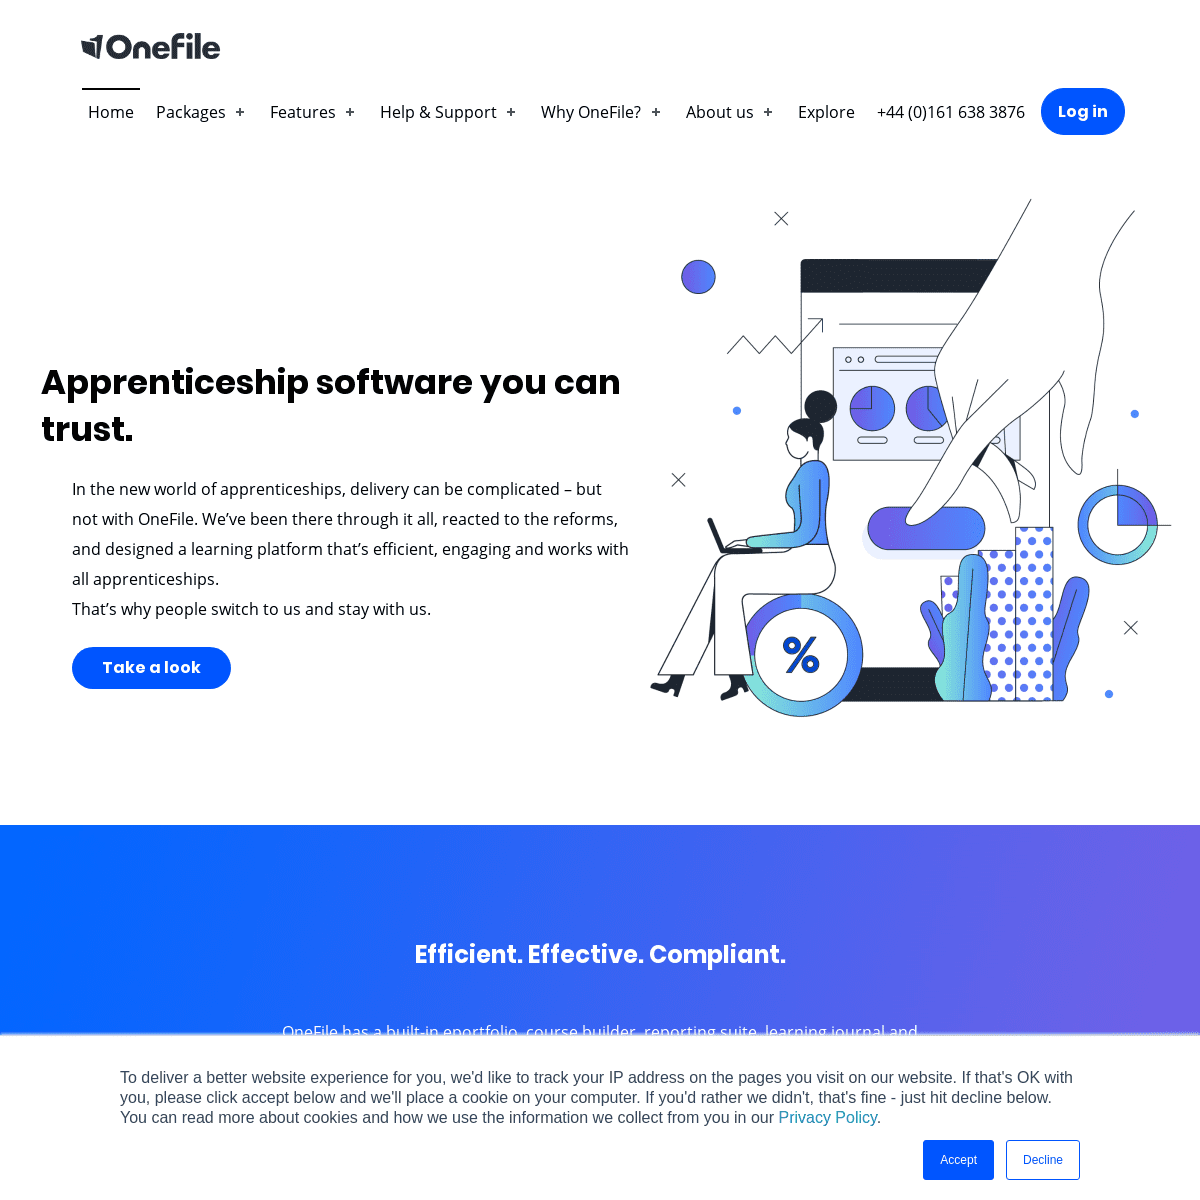 A complete backup of onefile.co.uk